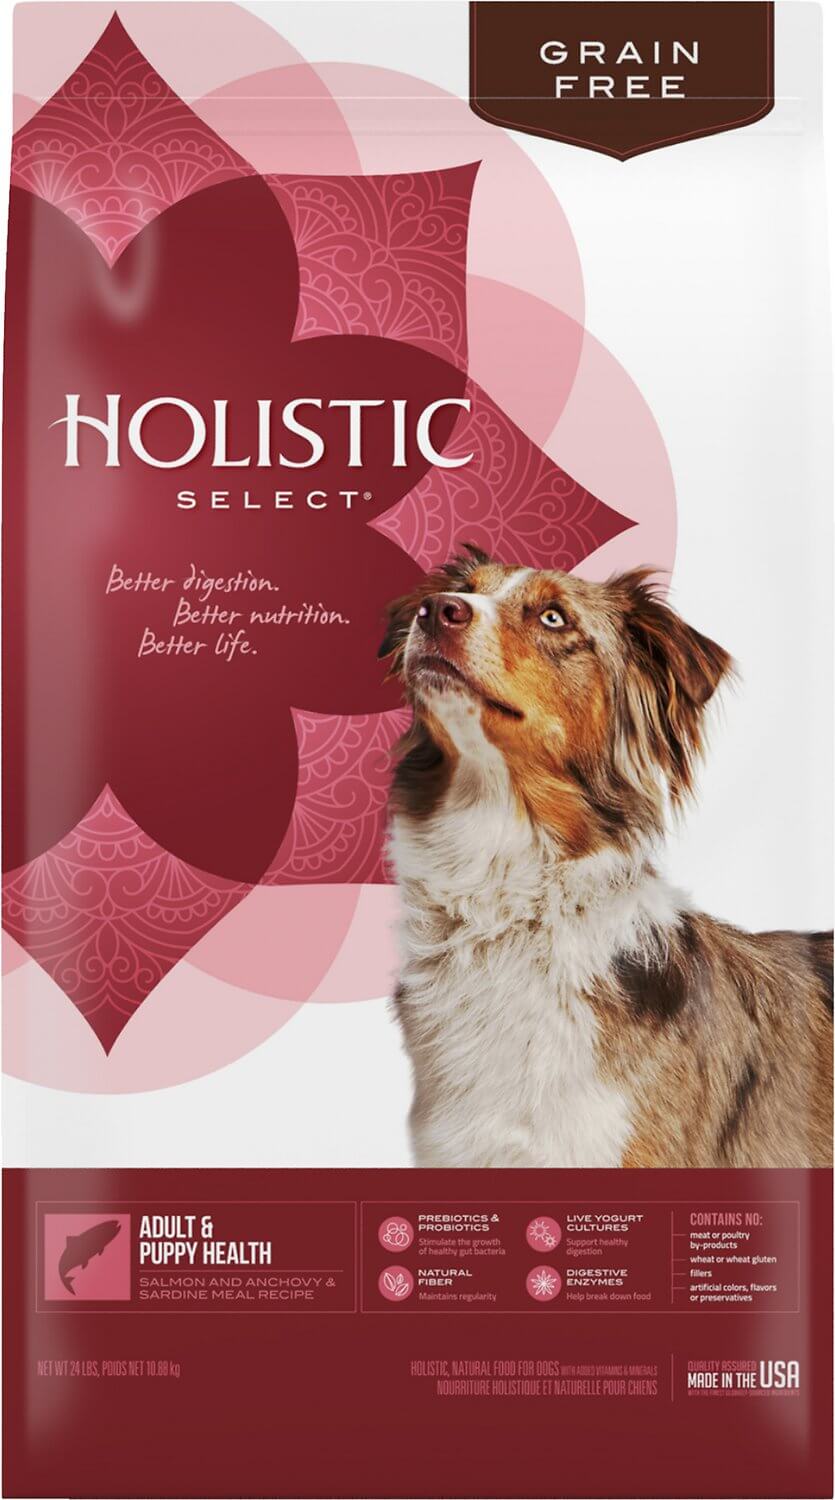 Holistic Select Grain Free Dog Food Review (Dry)